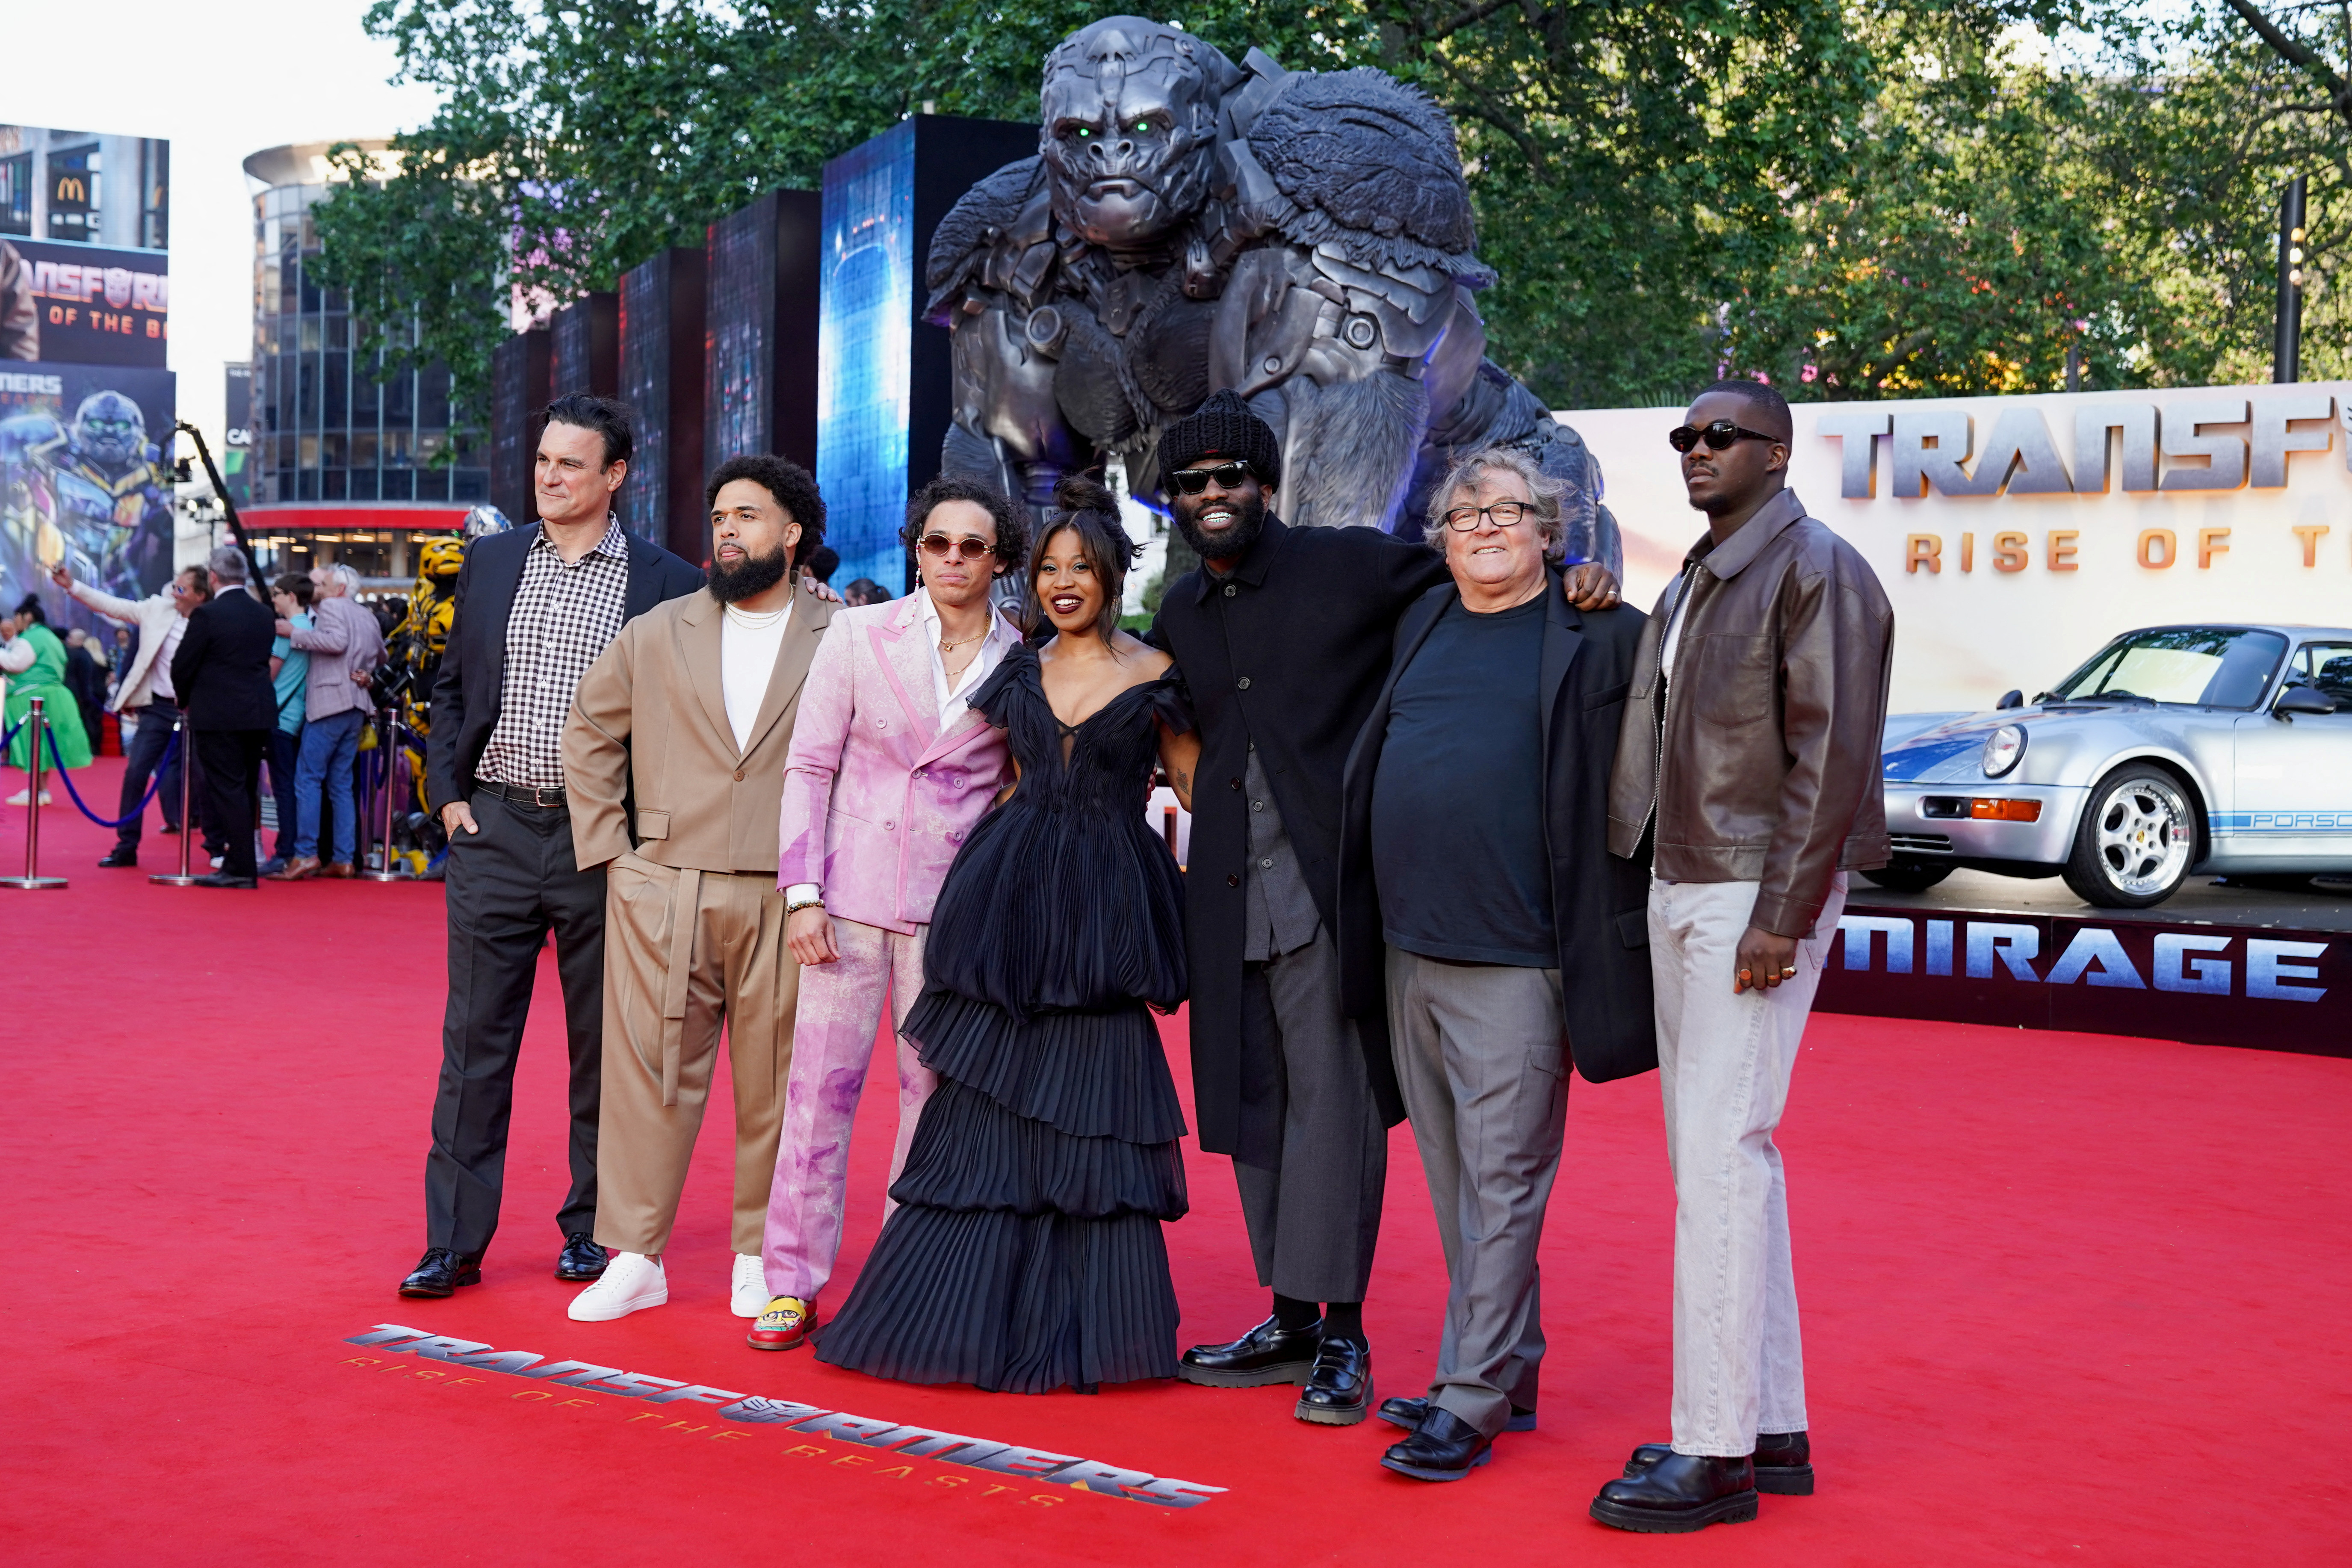 European premiere of Transformers in Leicester Square, London